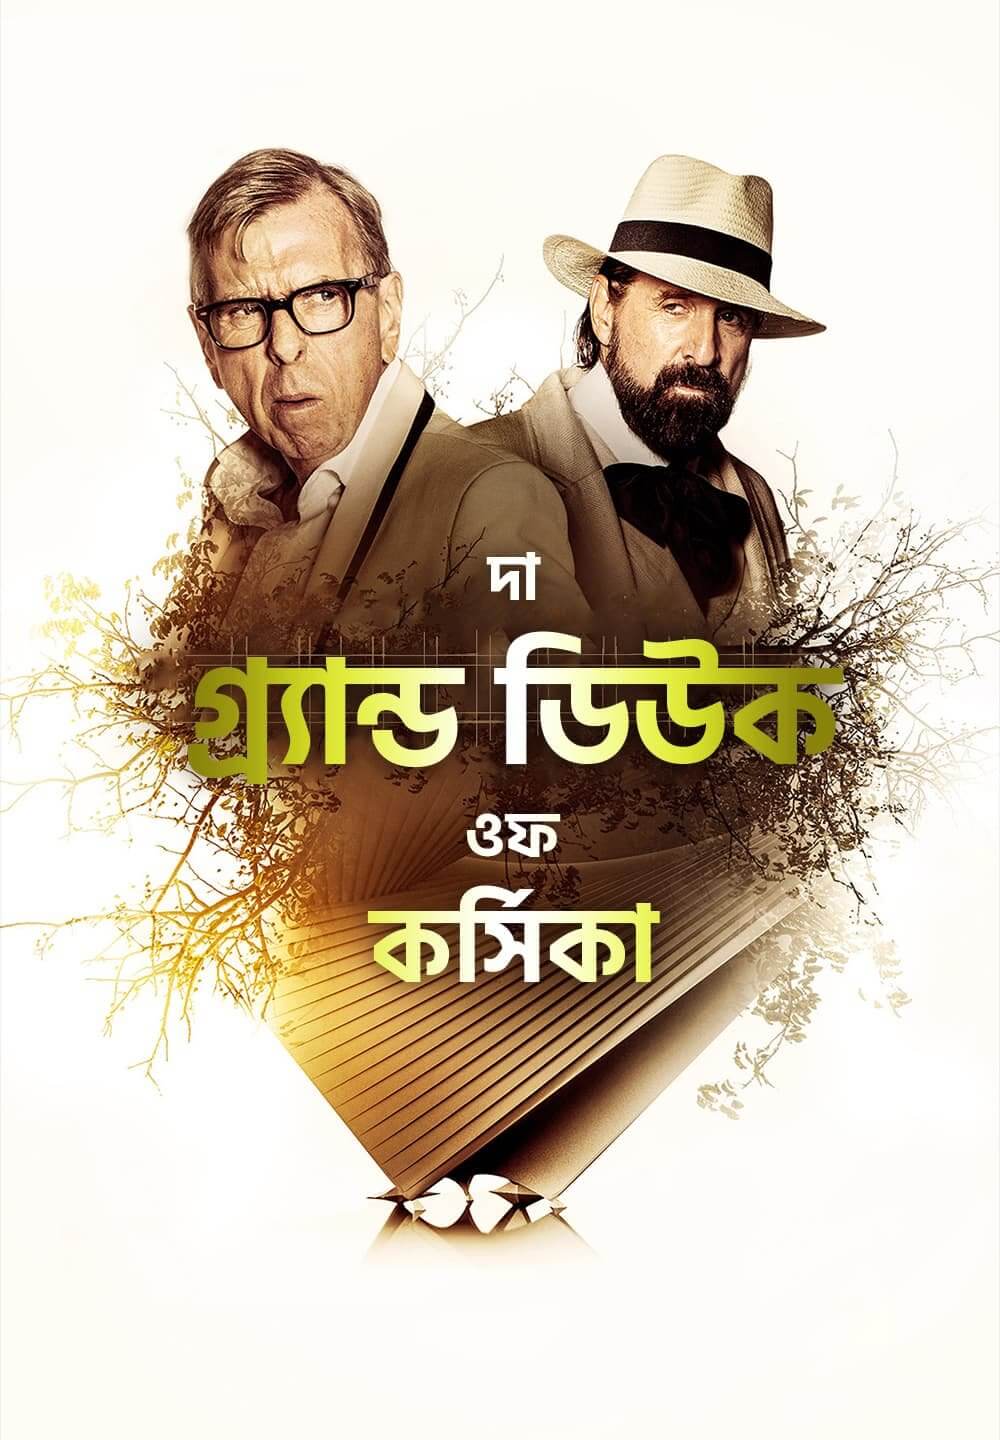 The Grand Duke of Corsica 2021 Bengali Dubbed Movie 720p HDRip 700MB Download